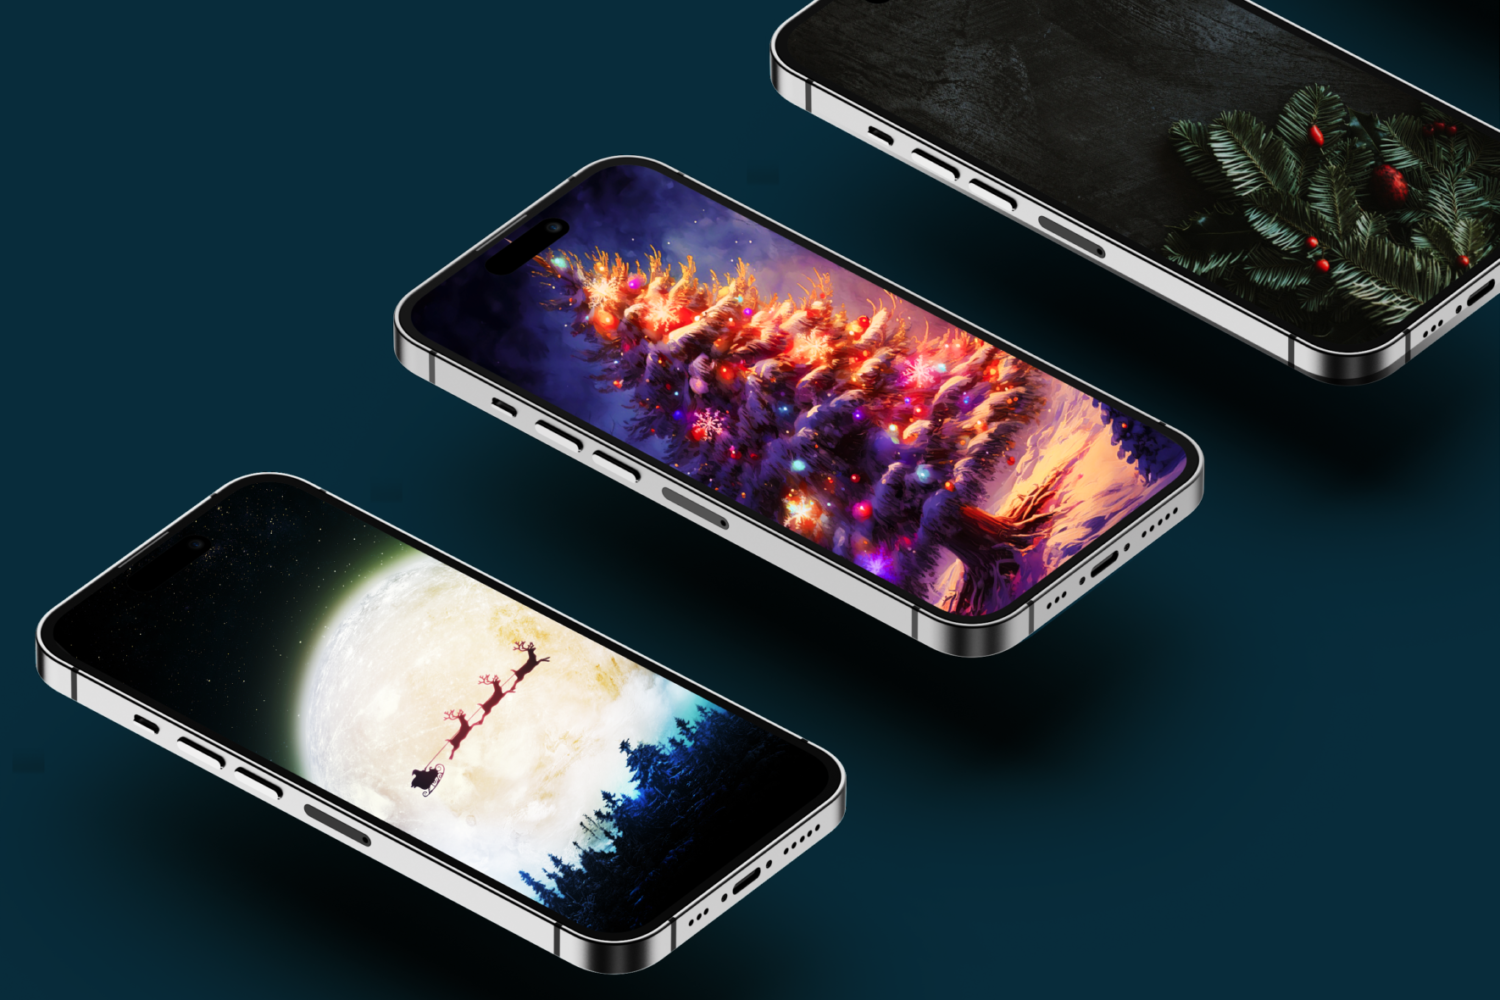 Download wallpapers for mobile & desktop for free